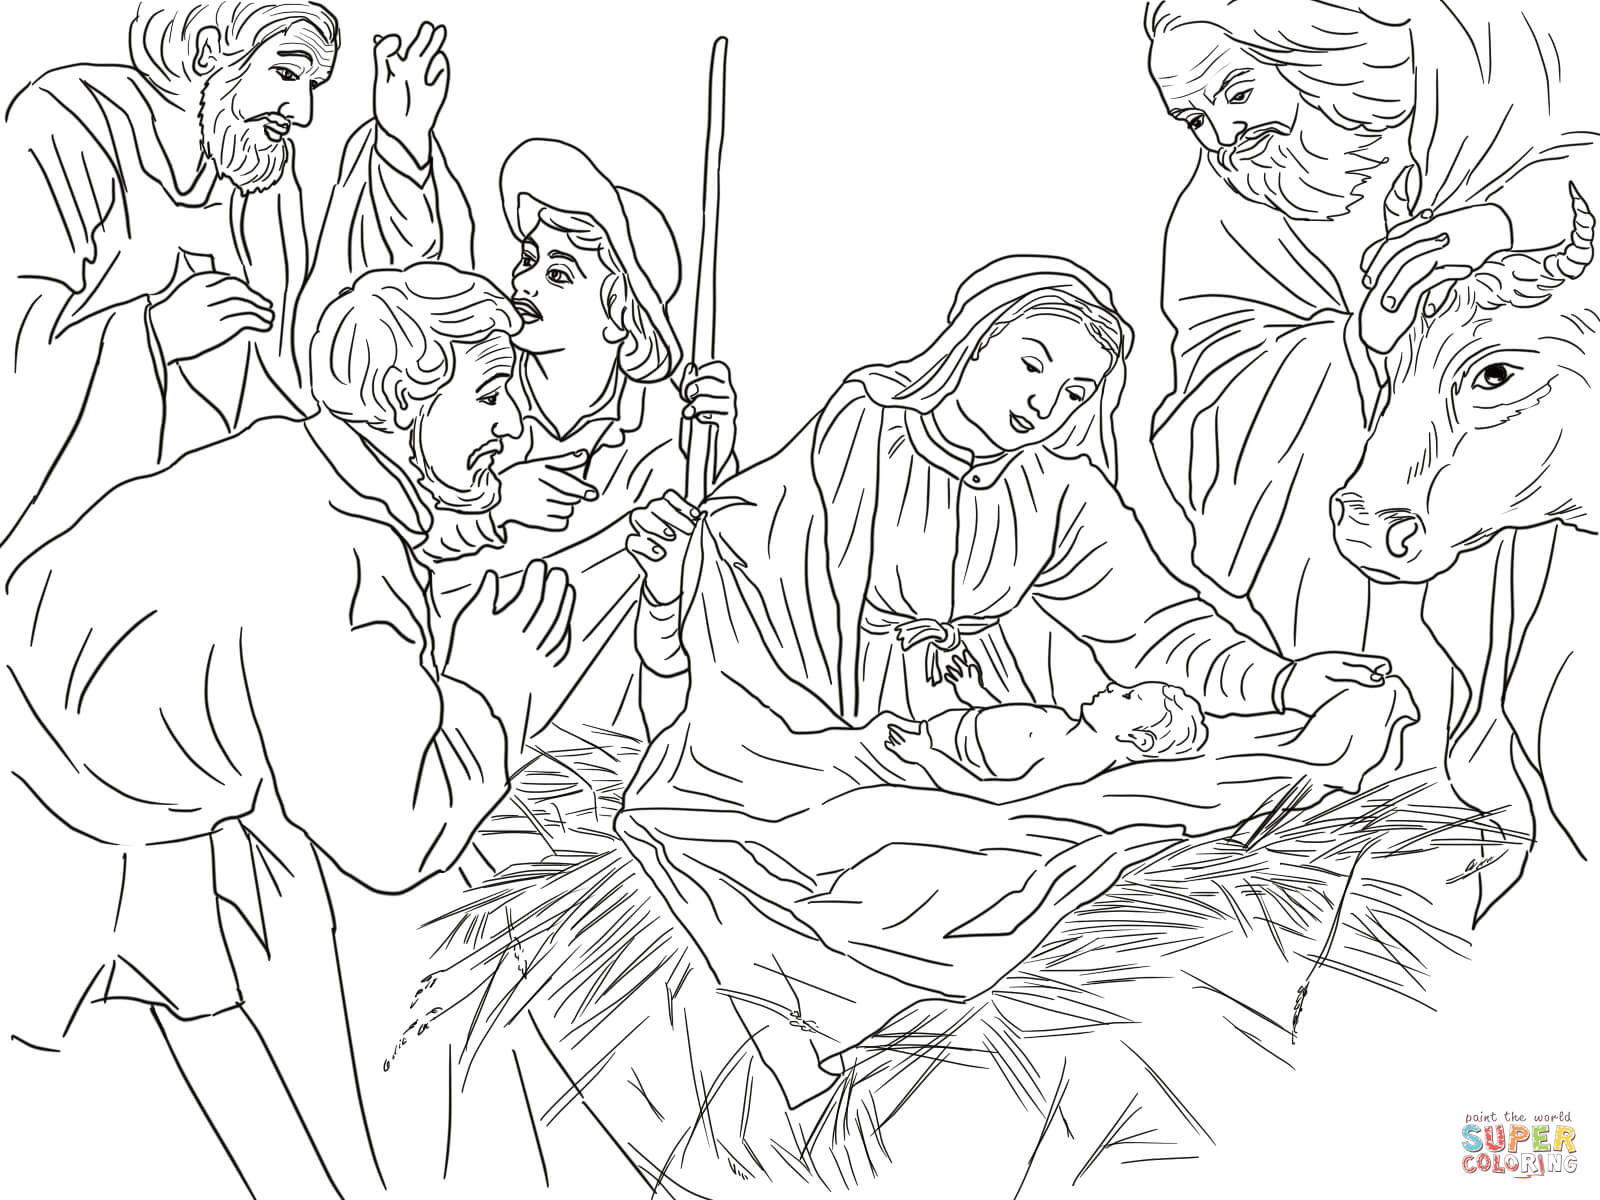 No Room at the Inn for Mary and Joseph coloring page | Free ...